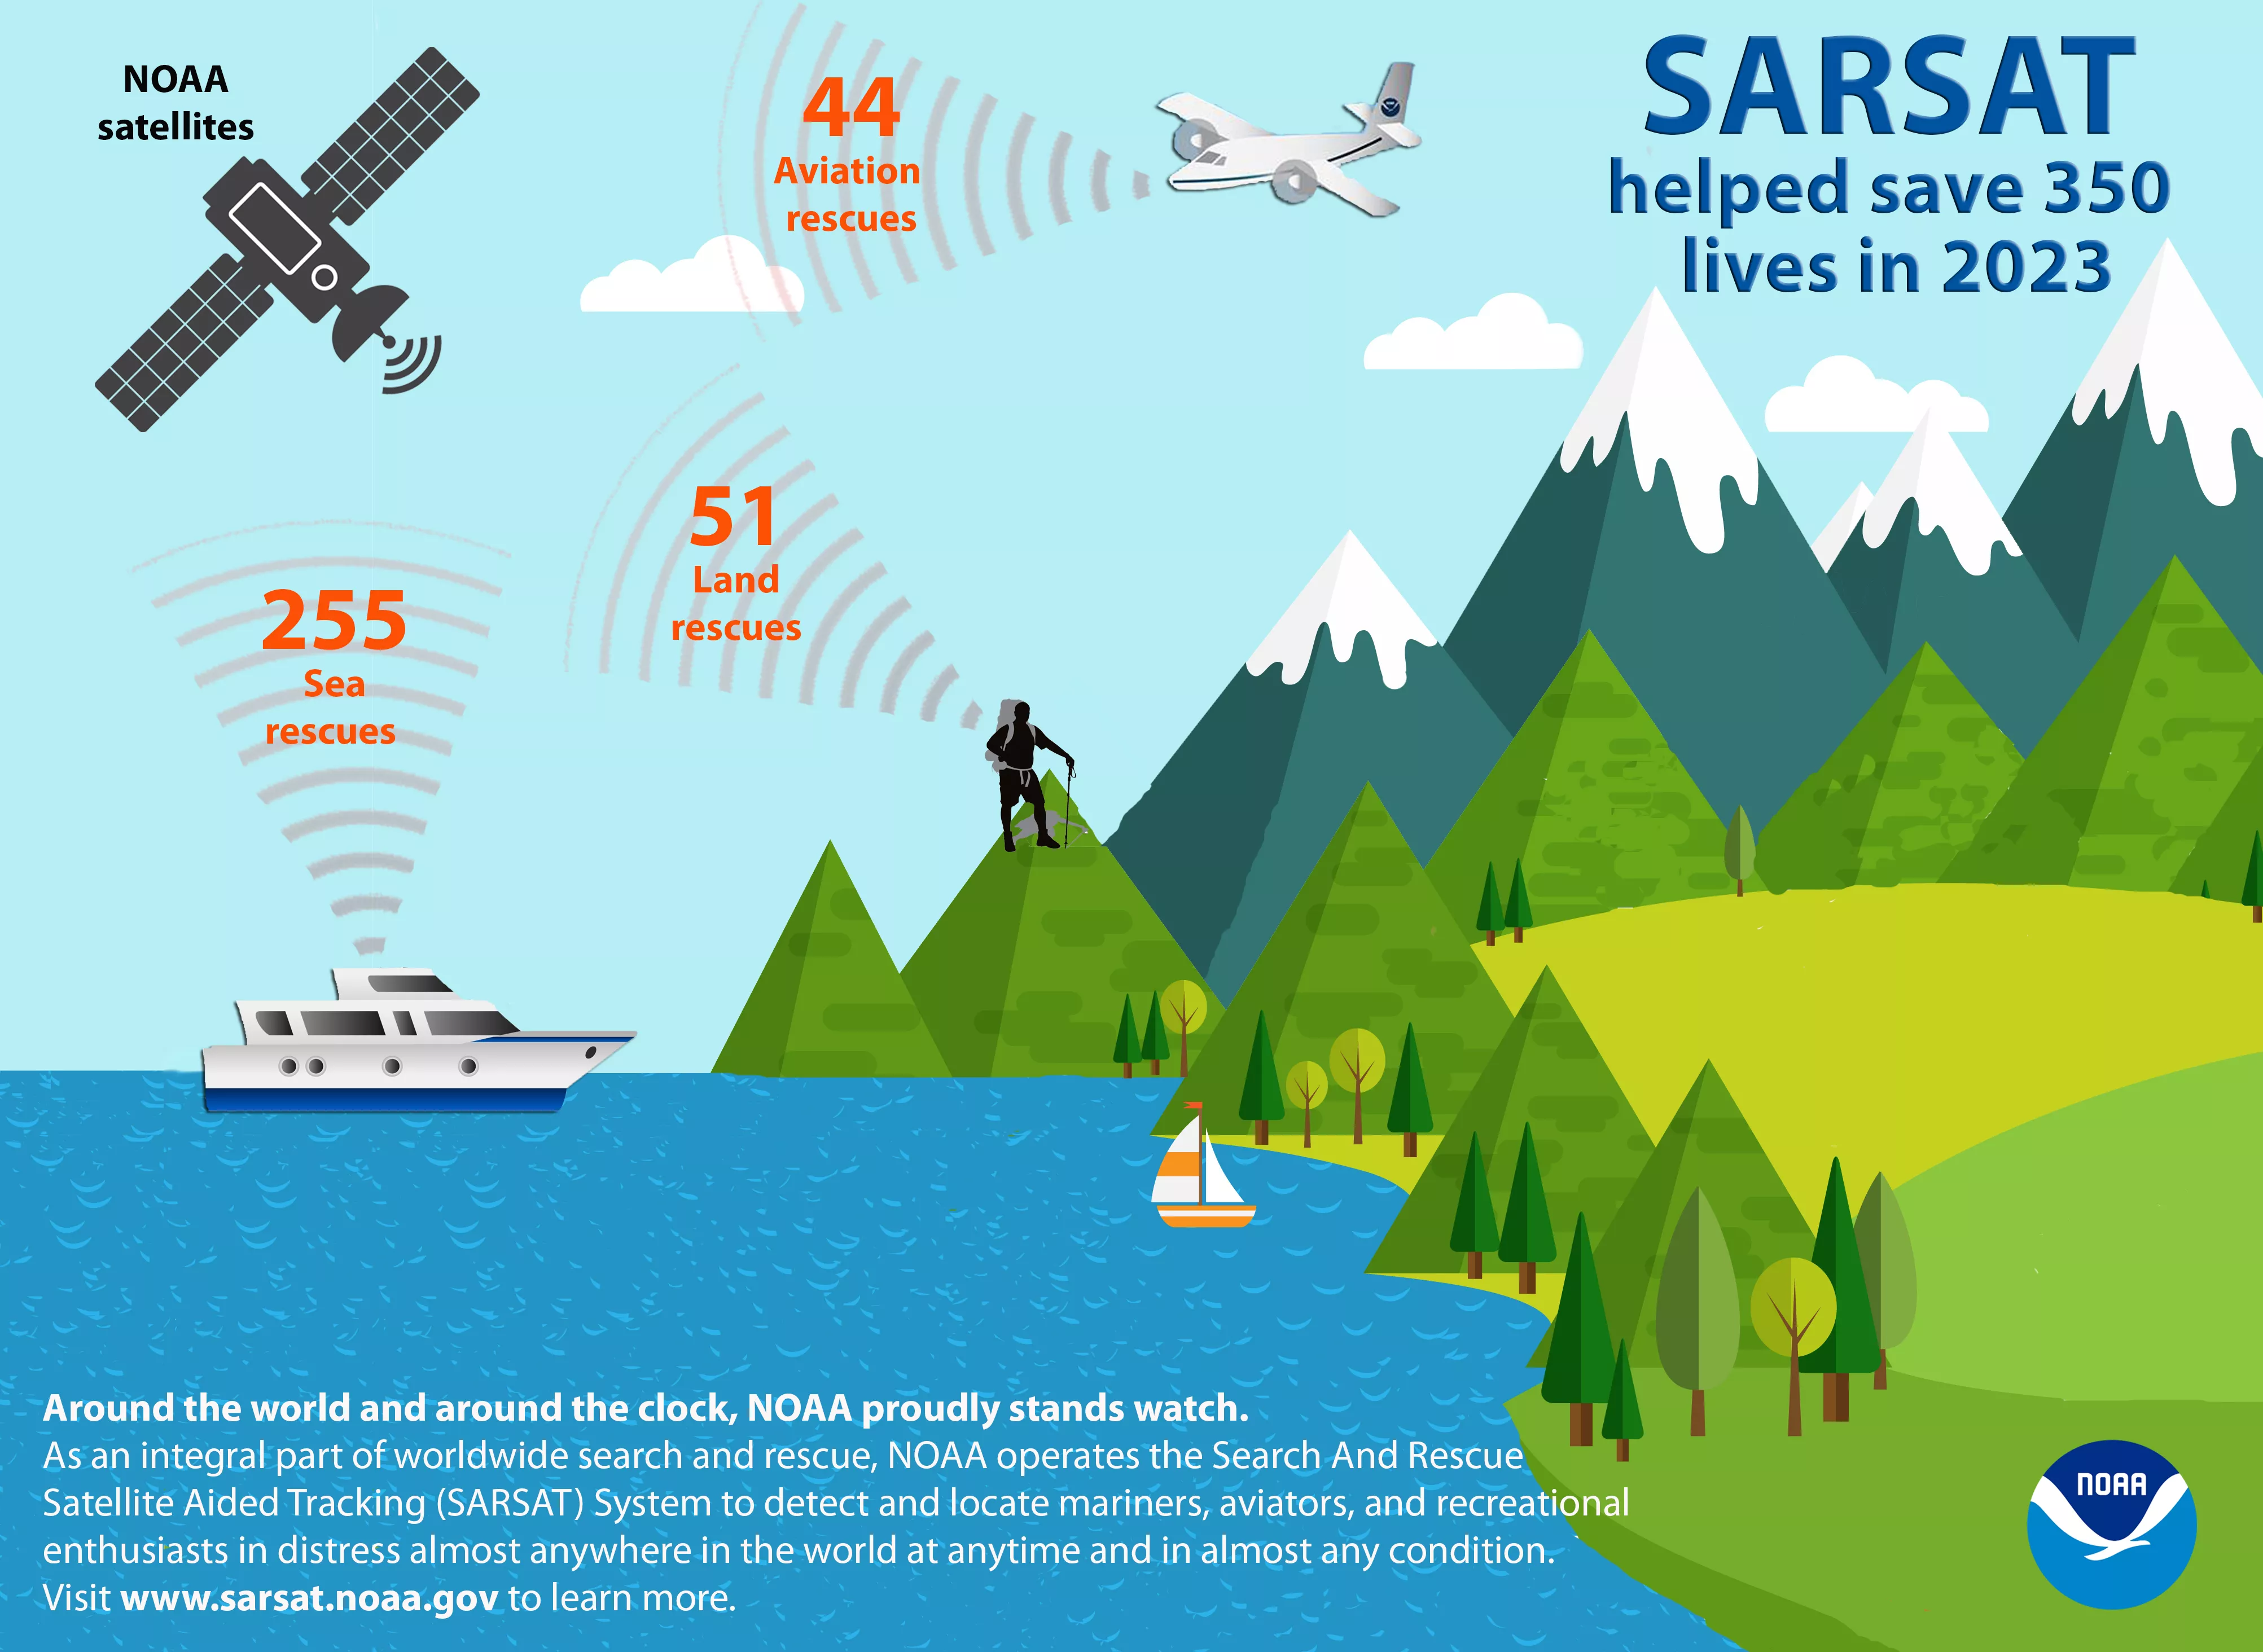 infographic showing SARSAT rescues from 2023